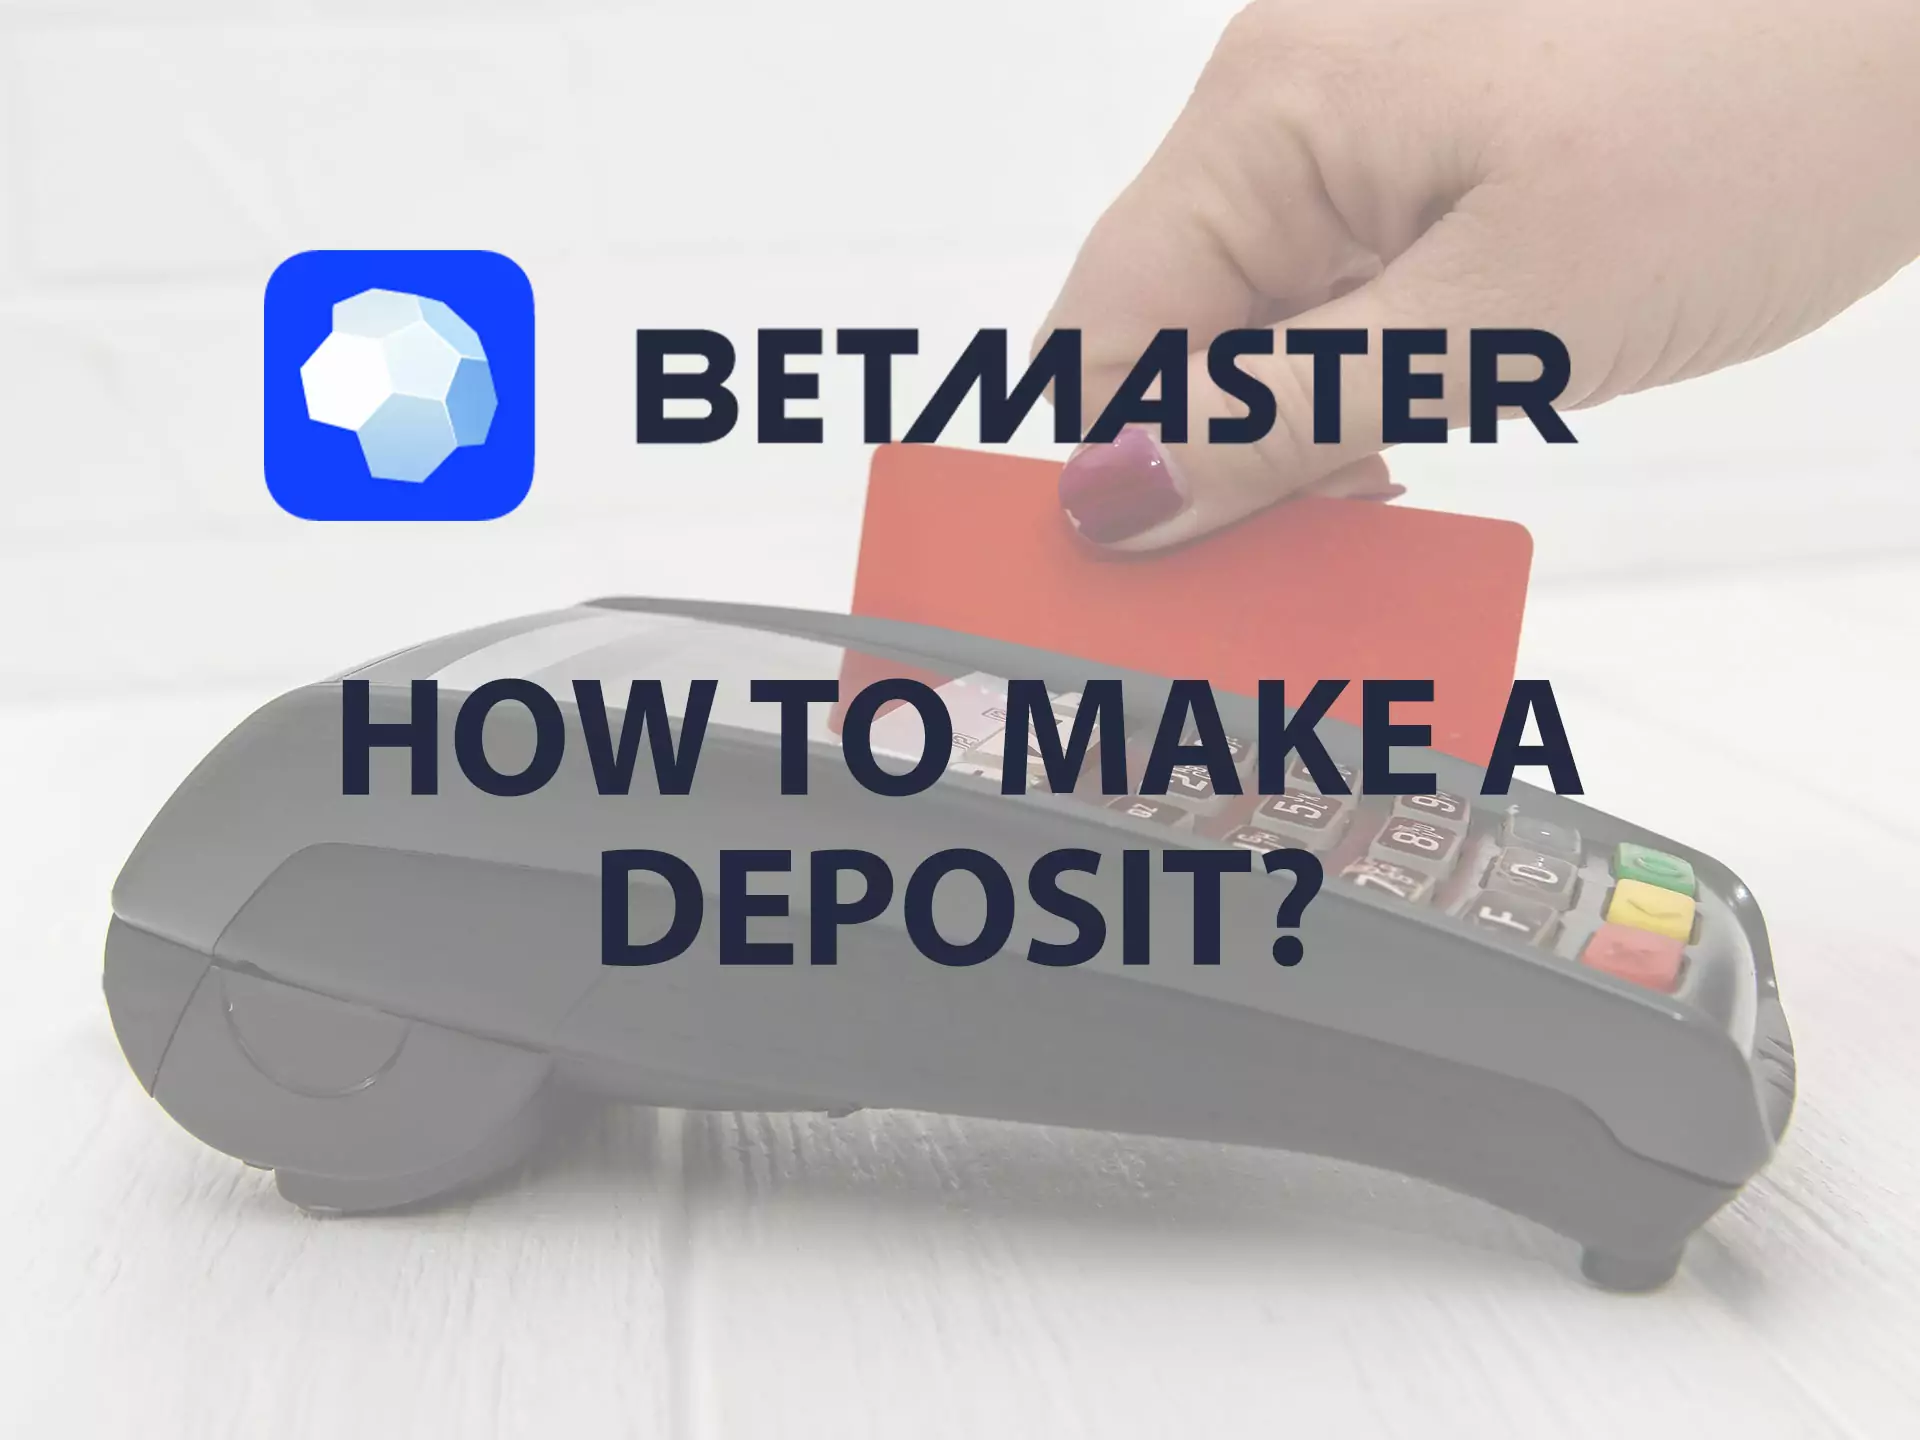 You can make a deposit in indian rupees at Betmaster.